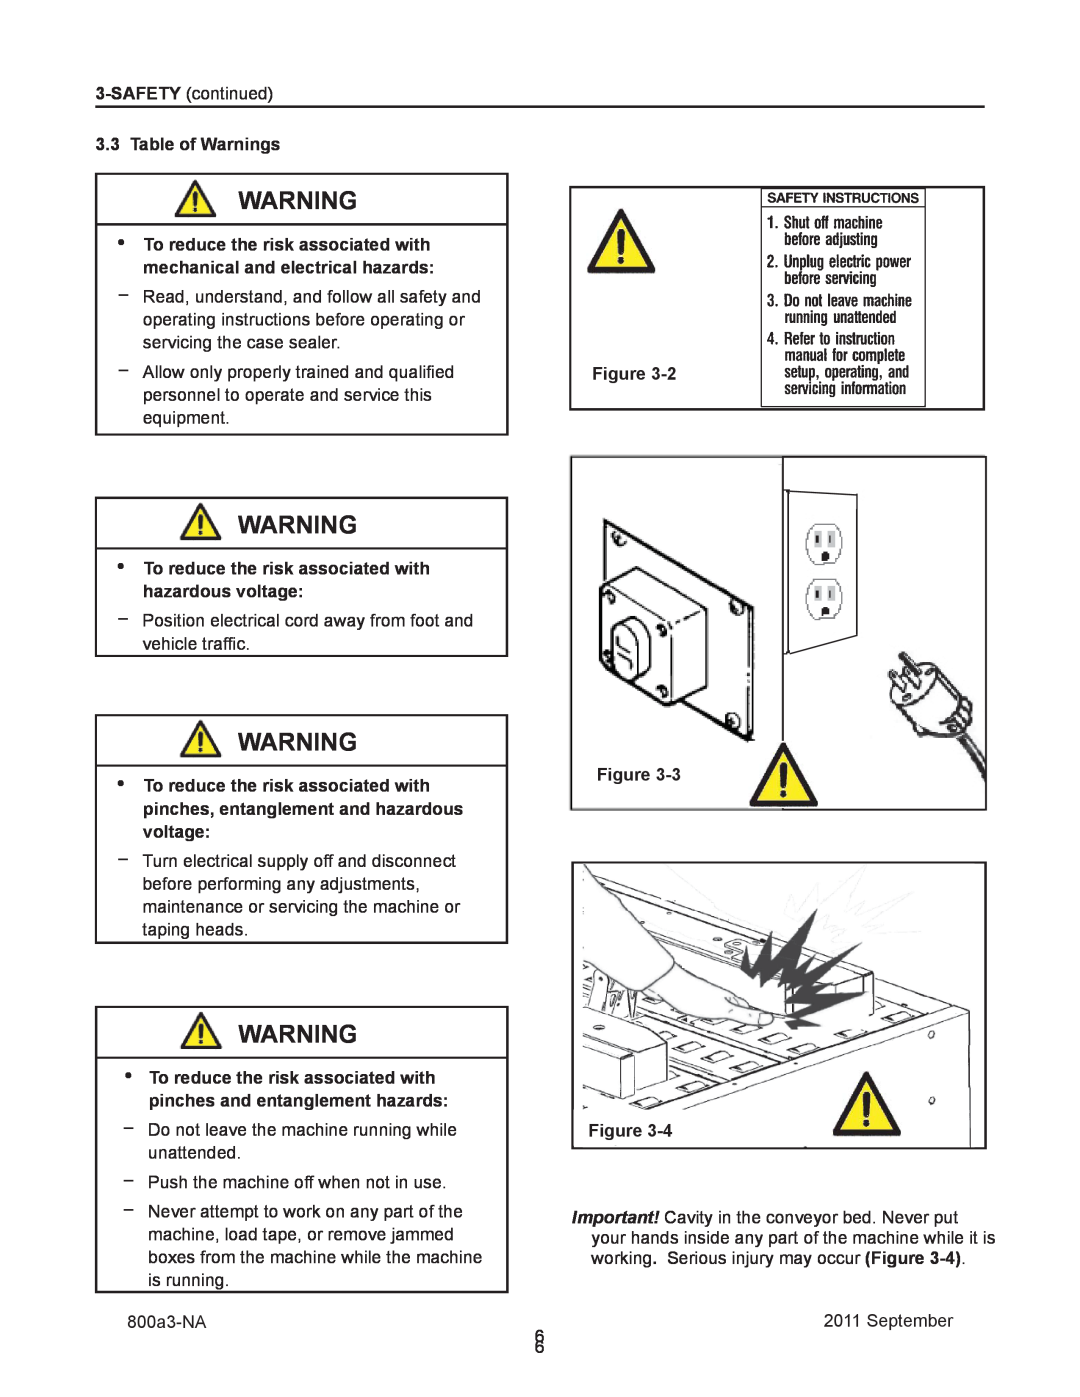 3M 800a3 manual Table of Warnings 